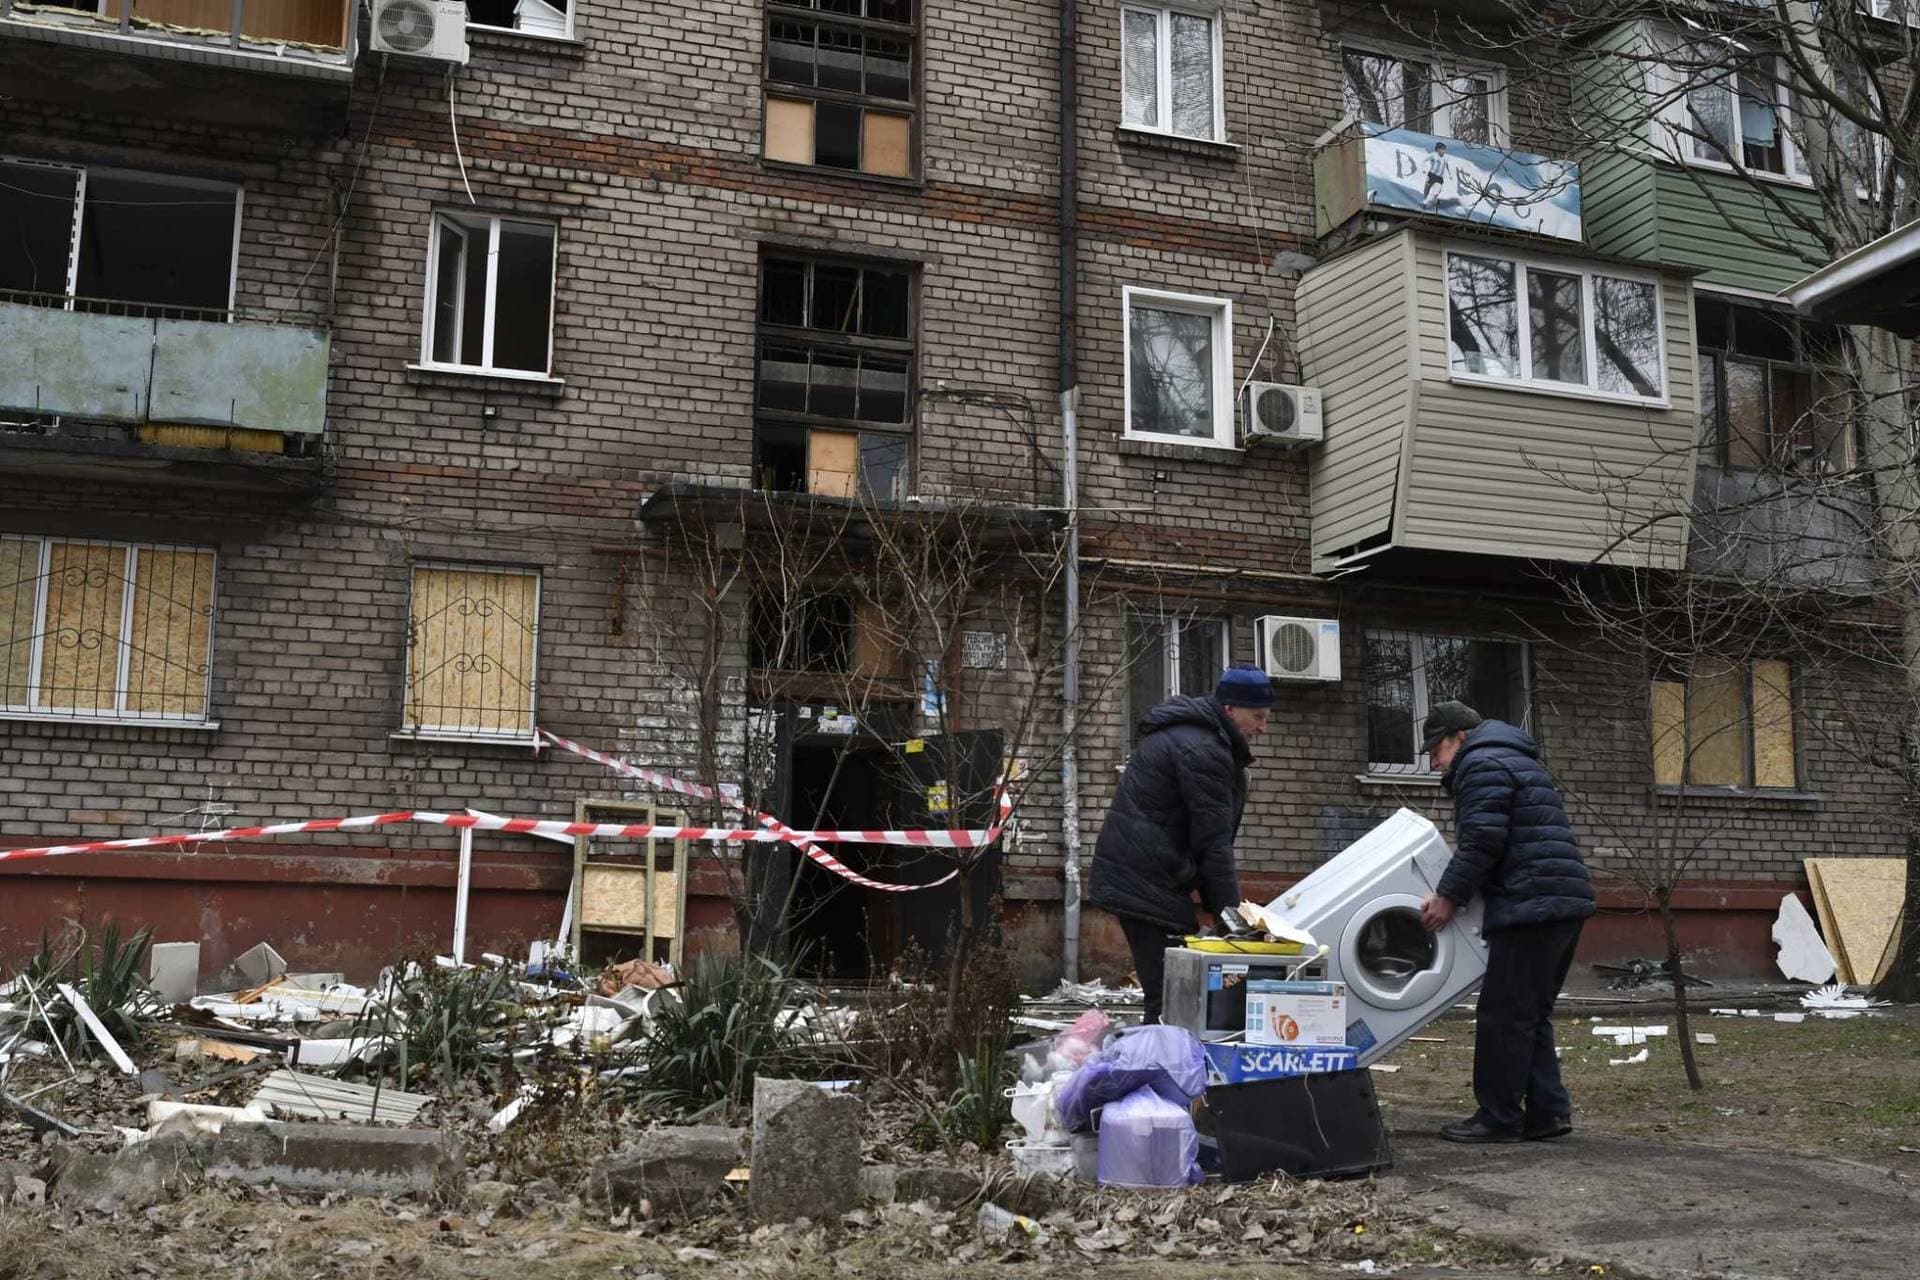 Local residents carry their belongings as they leave their home damaged in the night Russian rocket attack in Zaporizhzhya